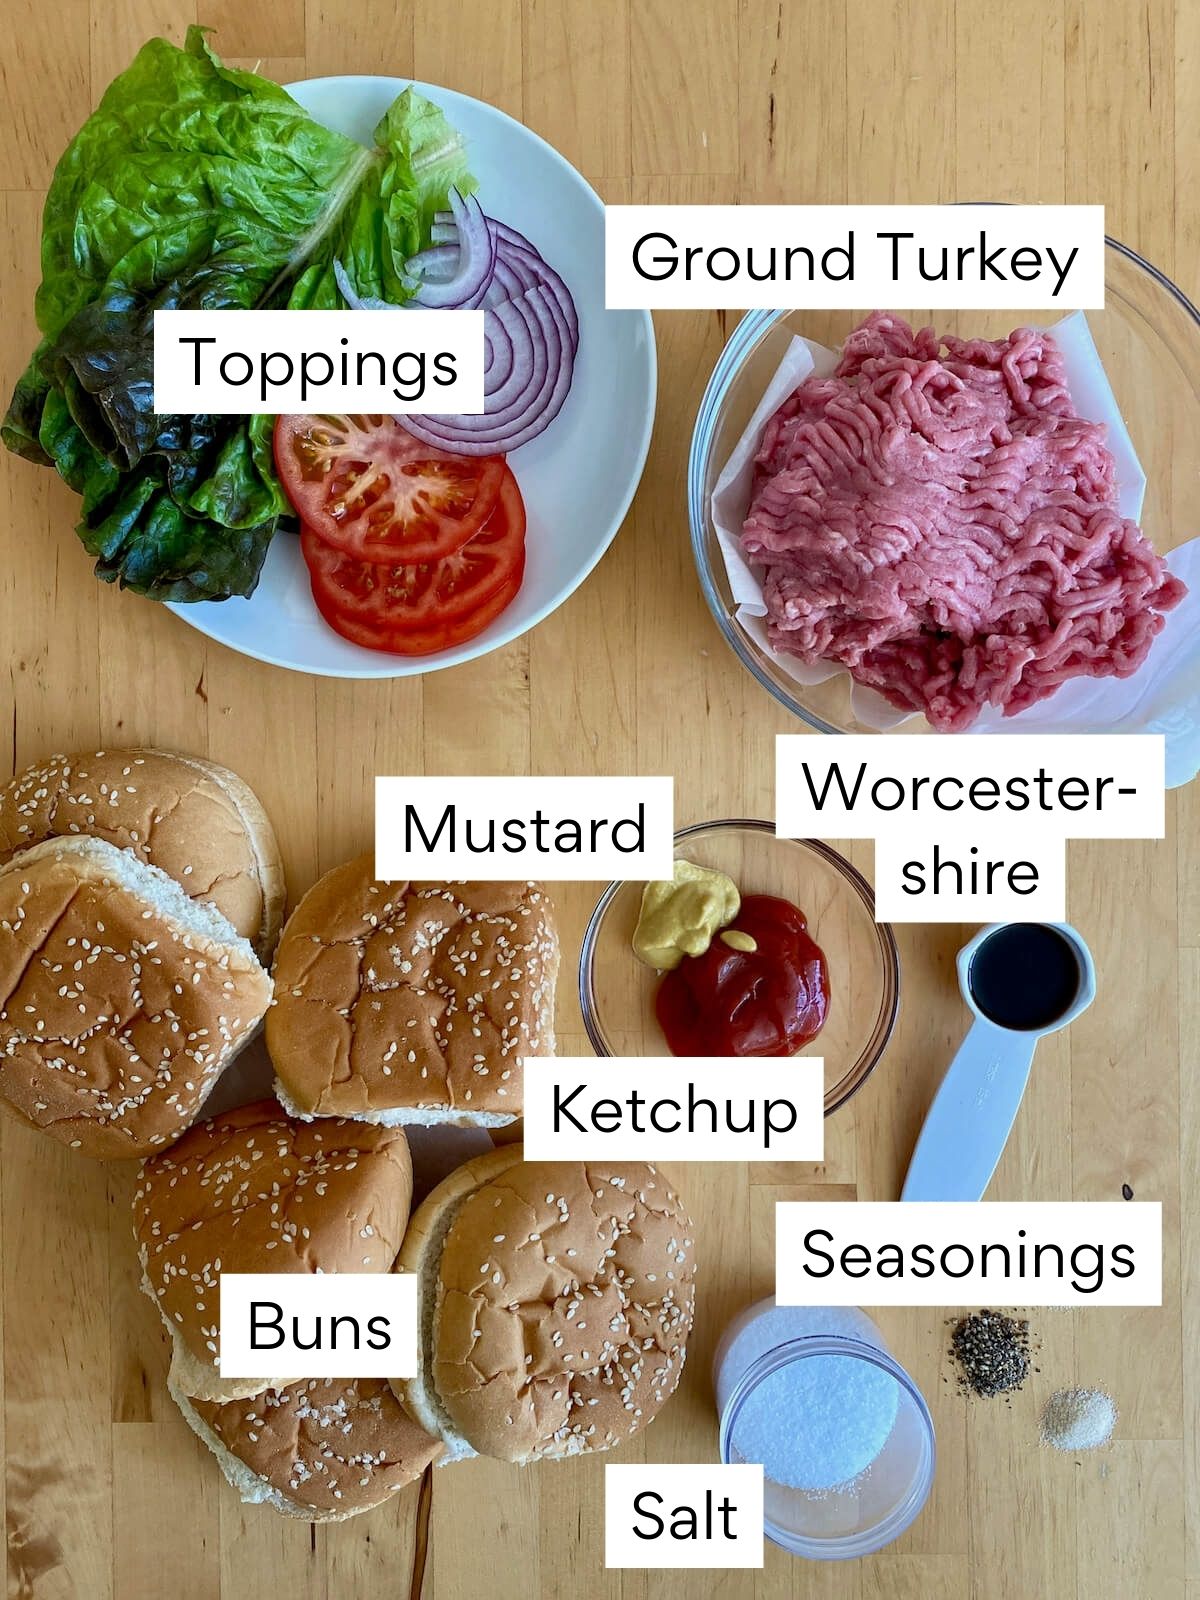 The ingredients to make turkey smash burgers. Each ingredient is labeled with text. They include ground turkey, Worcestershire sauce, mustard, ketchup, seasonings, salt, buns, and toppings.